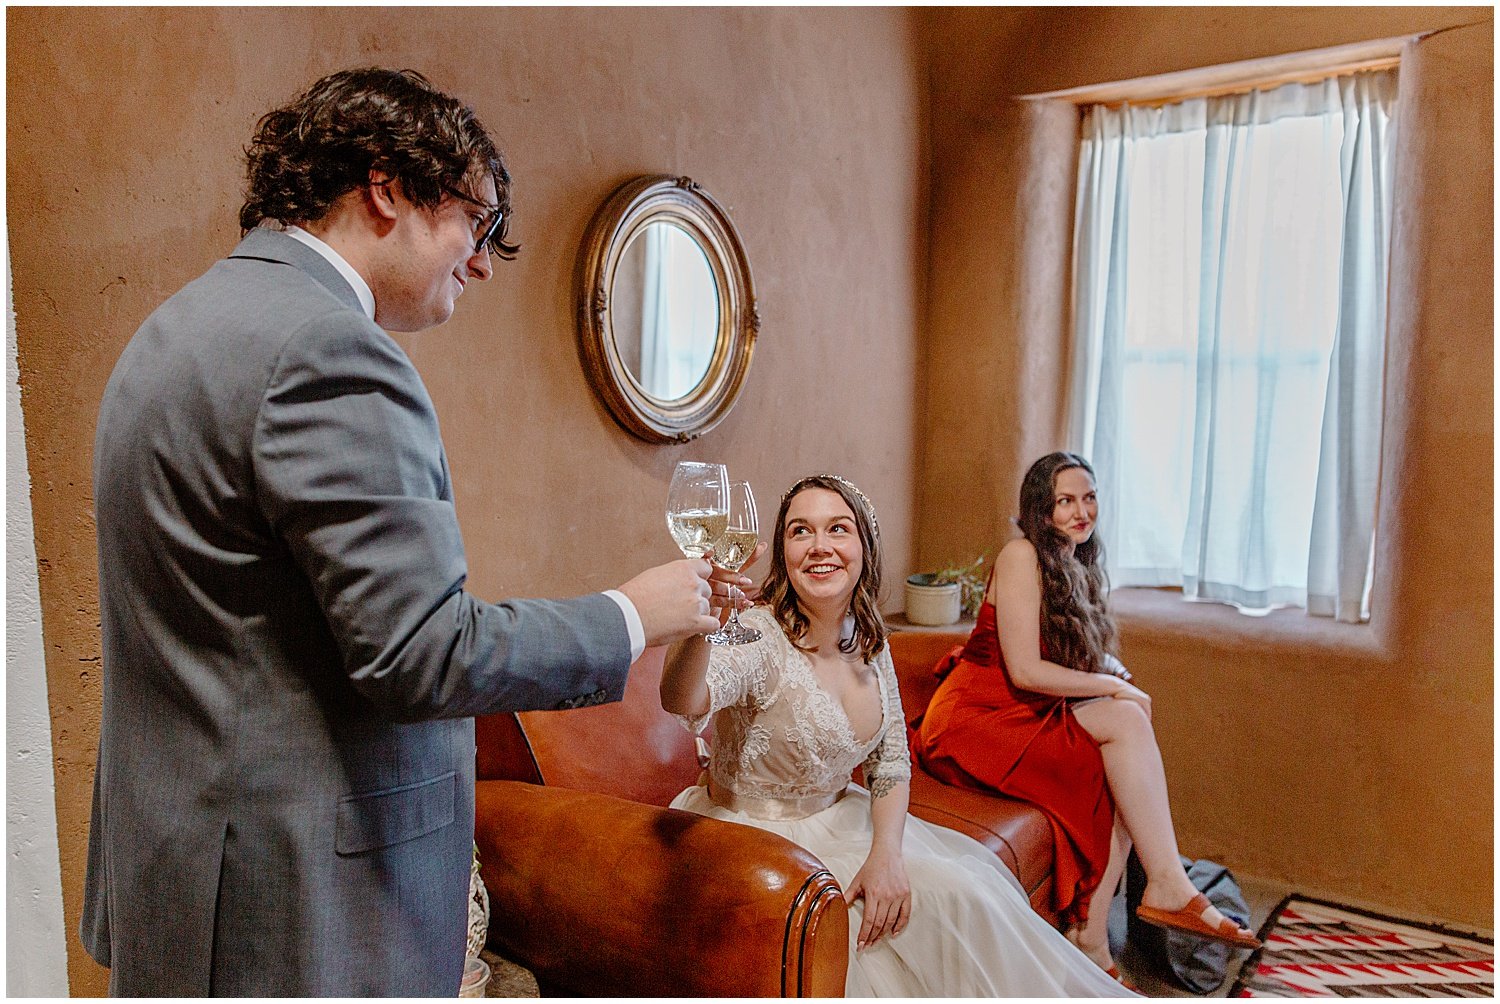  groom clinking glasses with friends and family before ceremony at Tucson Intimate Wedding 